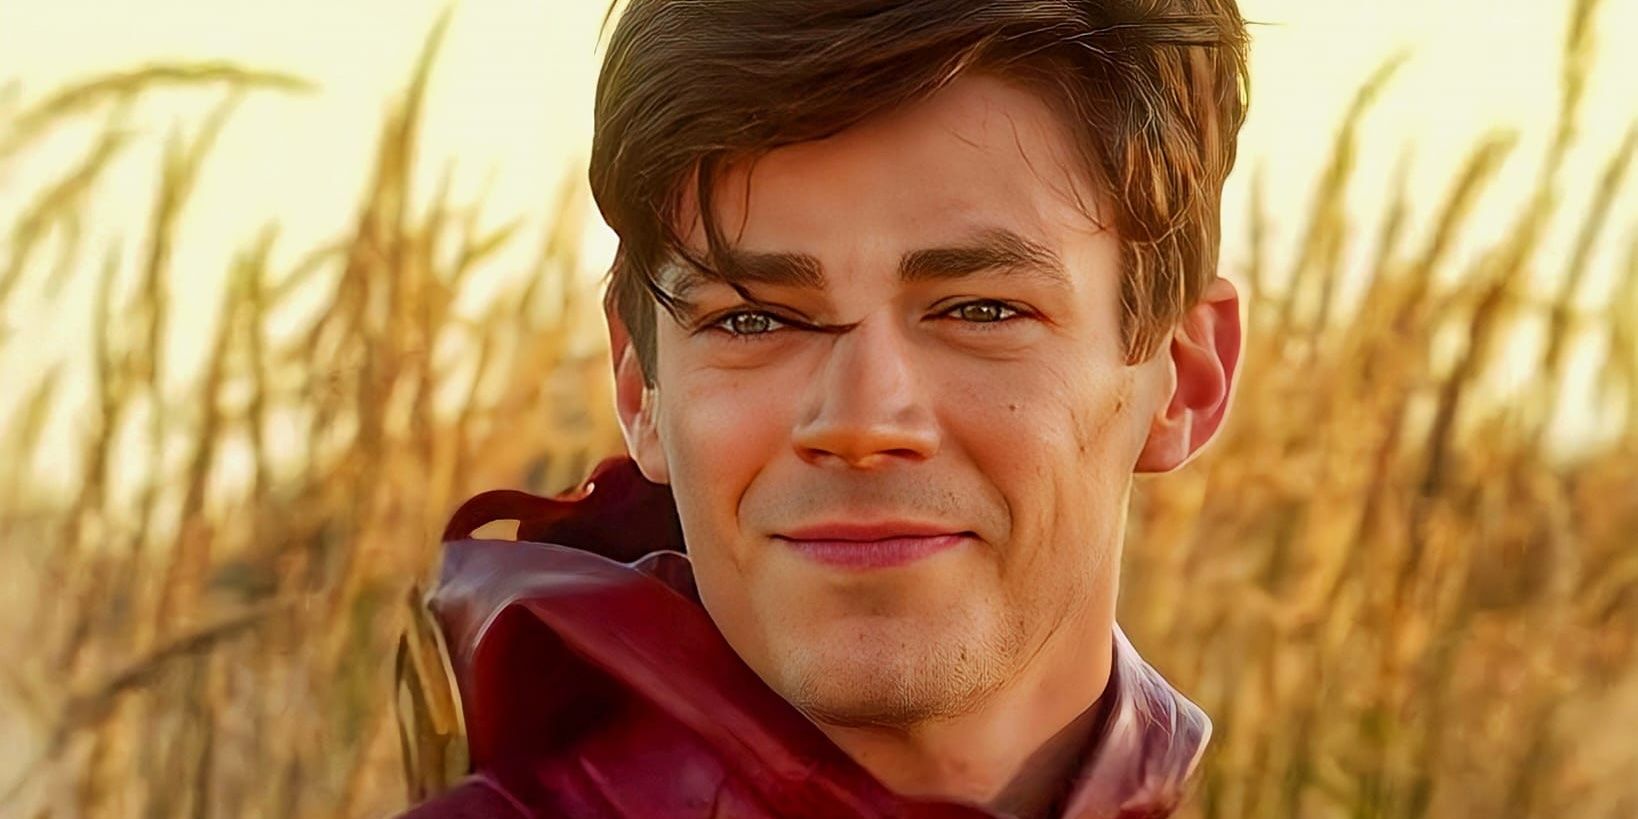 Barry Allen (Grant Gustin) Unmasked Looking Teary Eyed In A Cornfield In The Flash Season 4 Episode 1